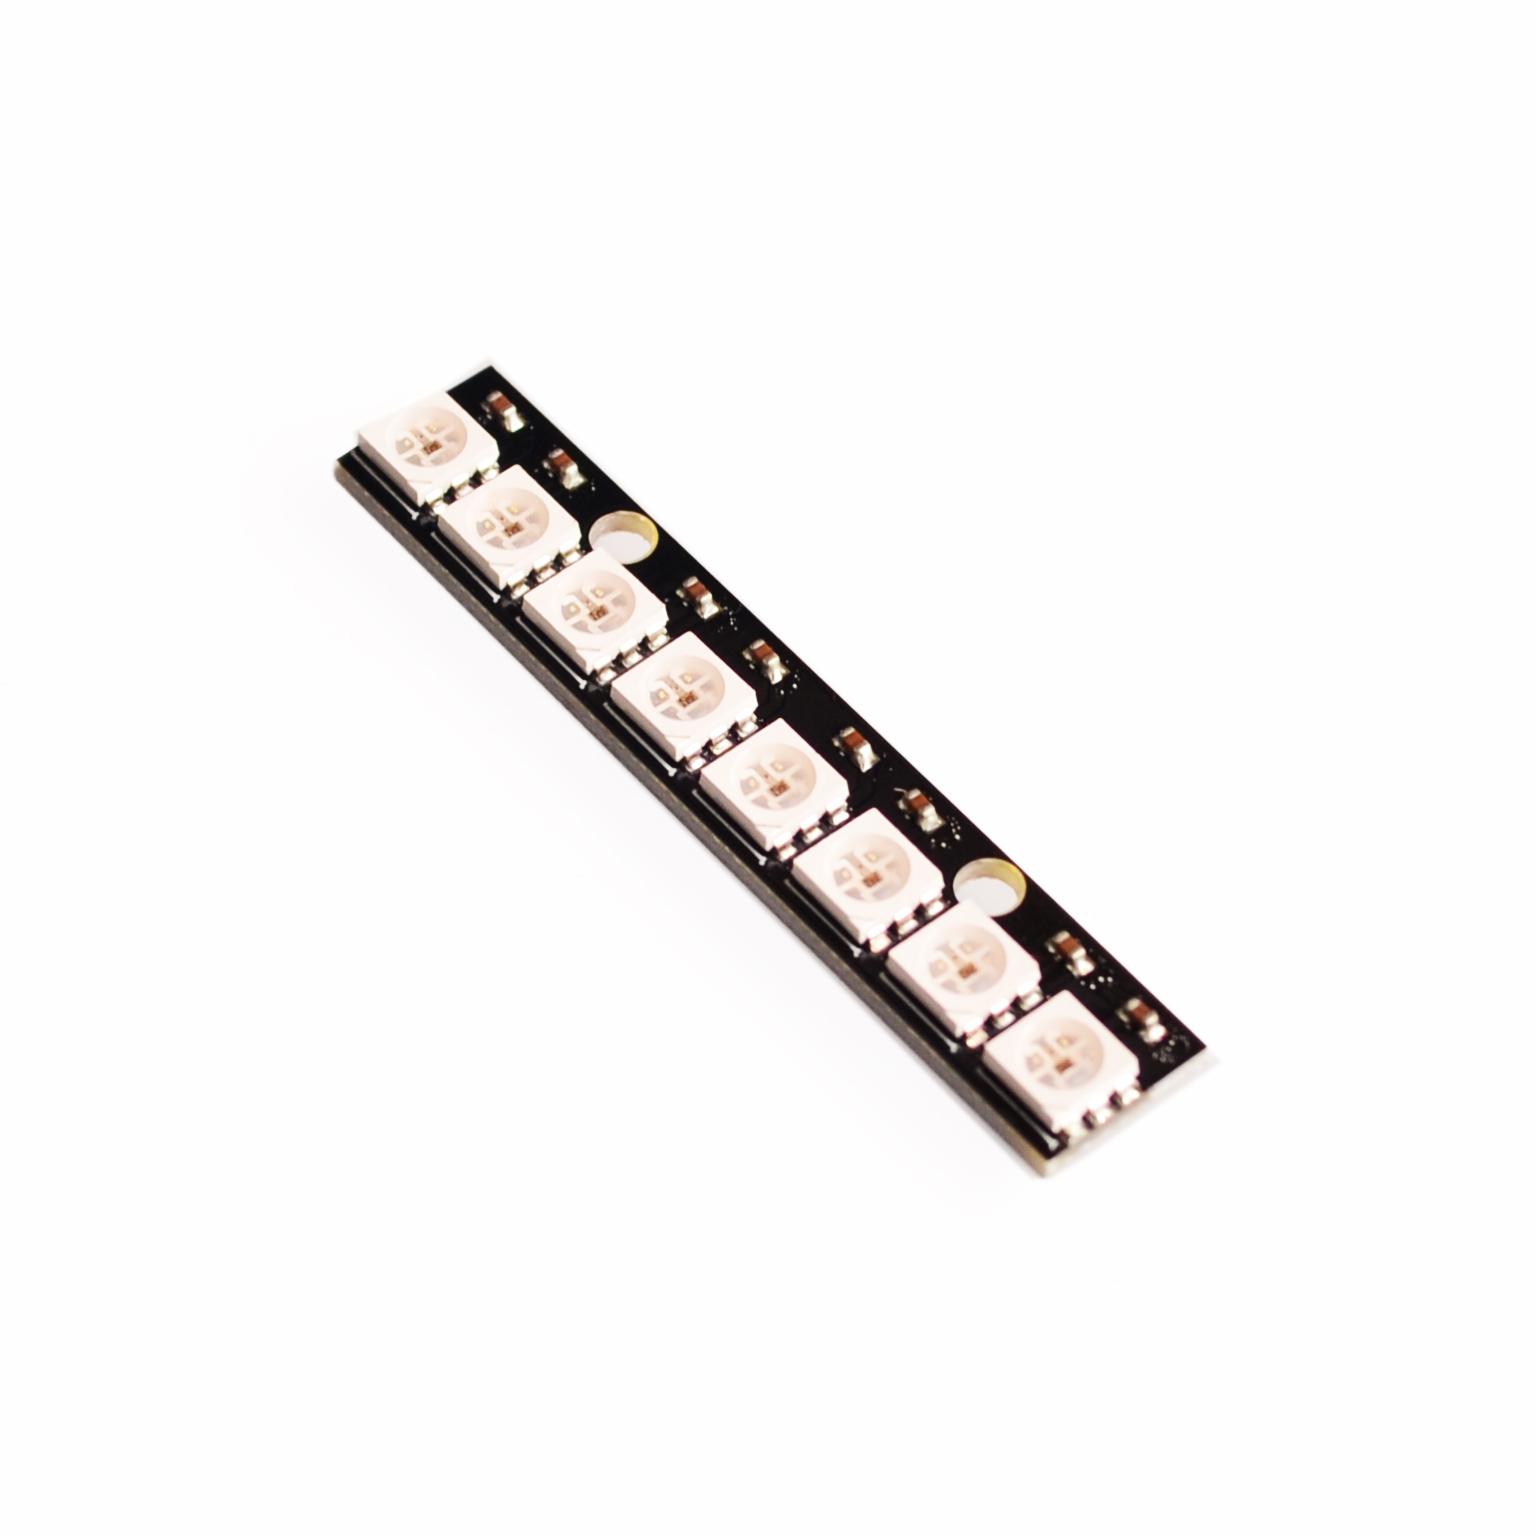 WS2812 5050-RGB Built-in LED 8 Colorful LED Module for